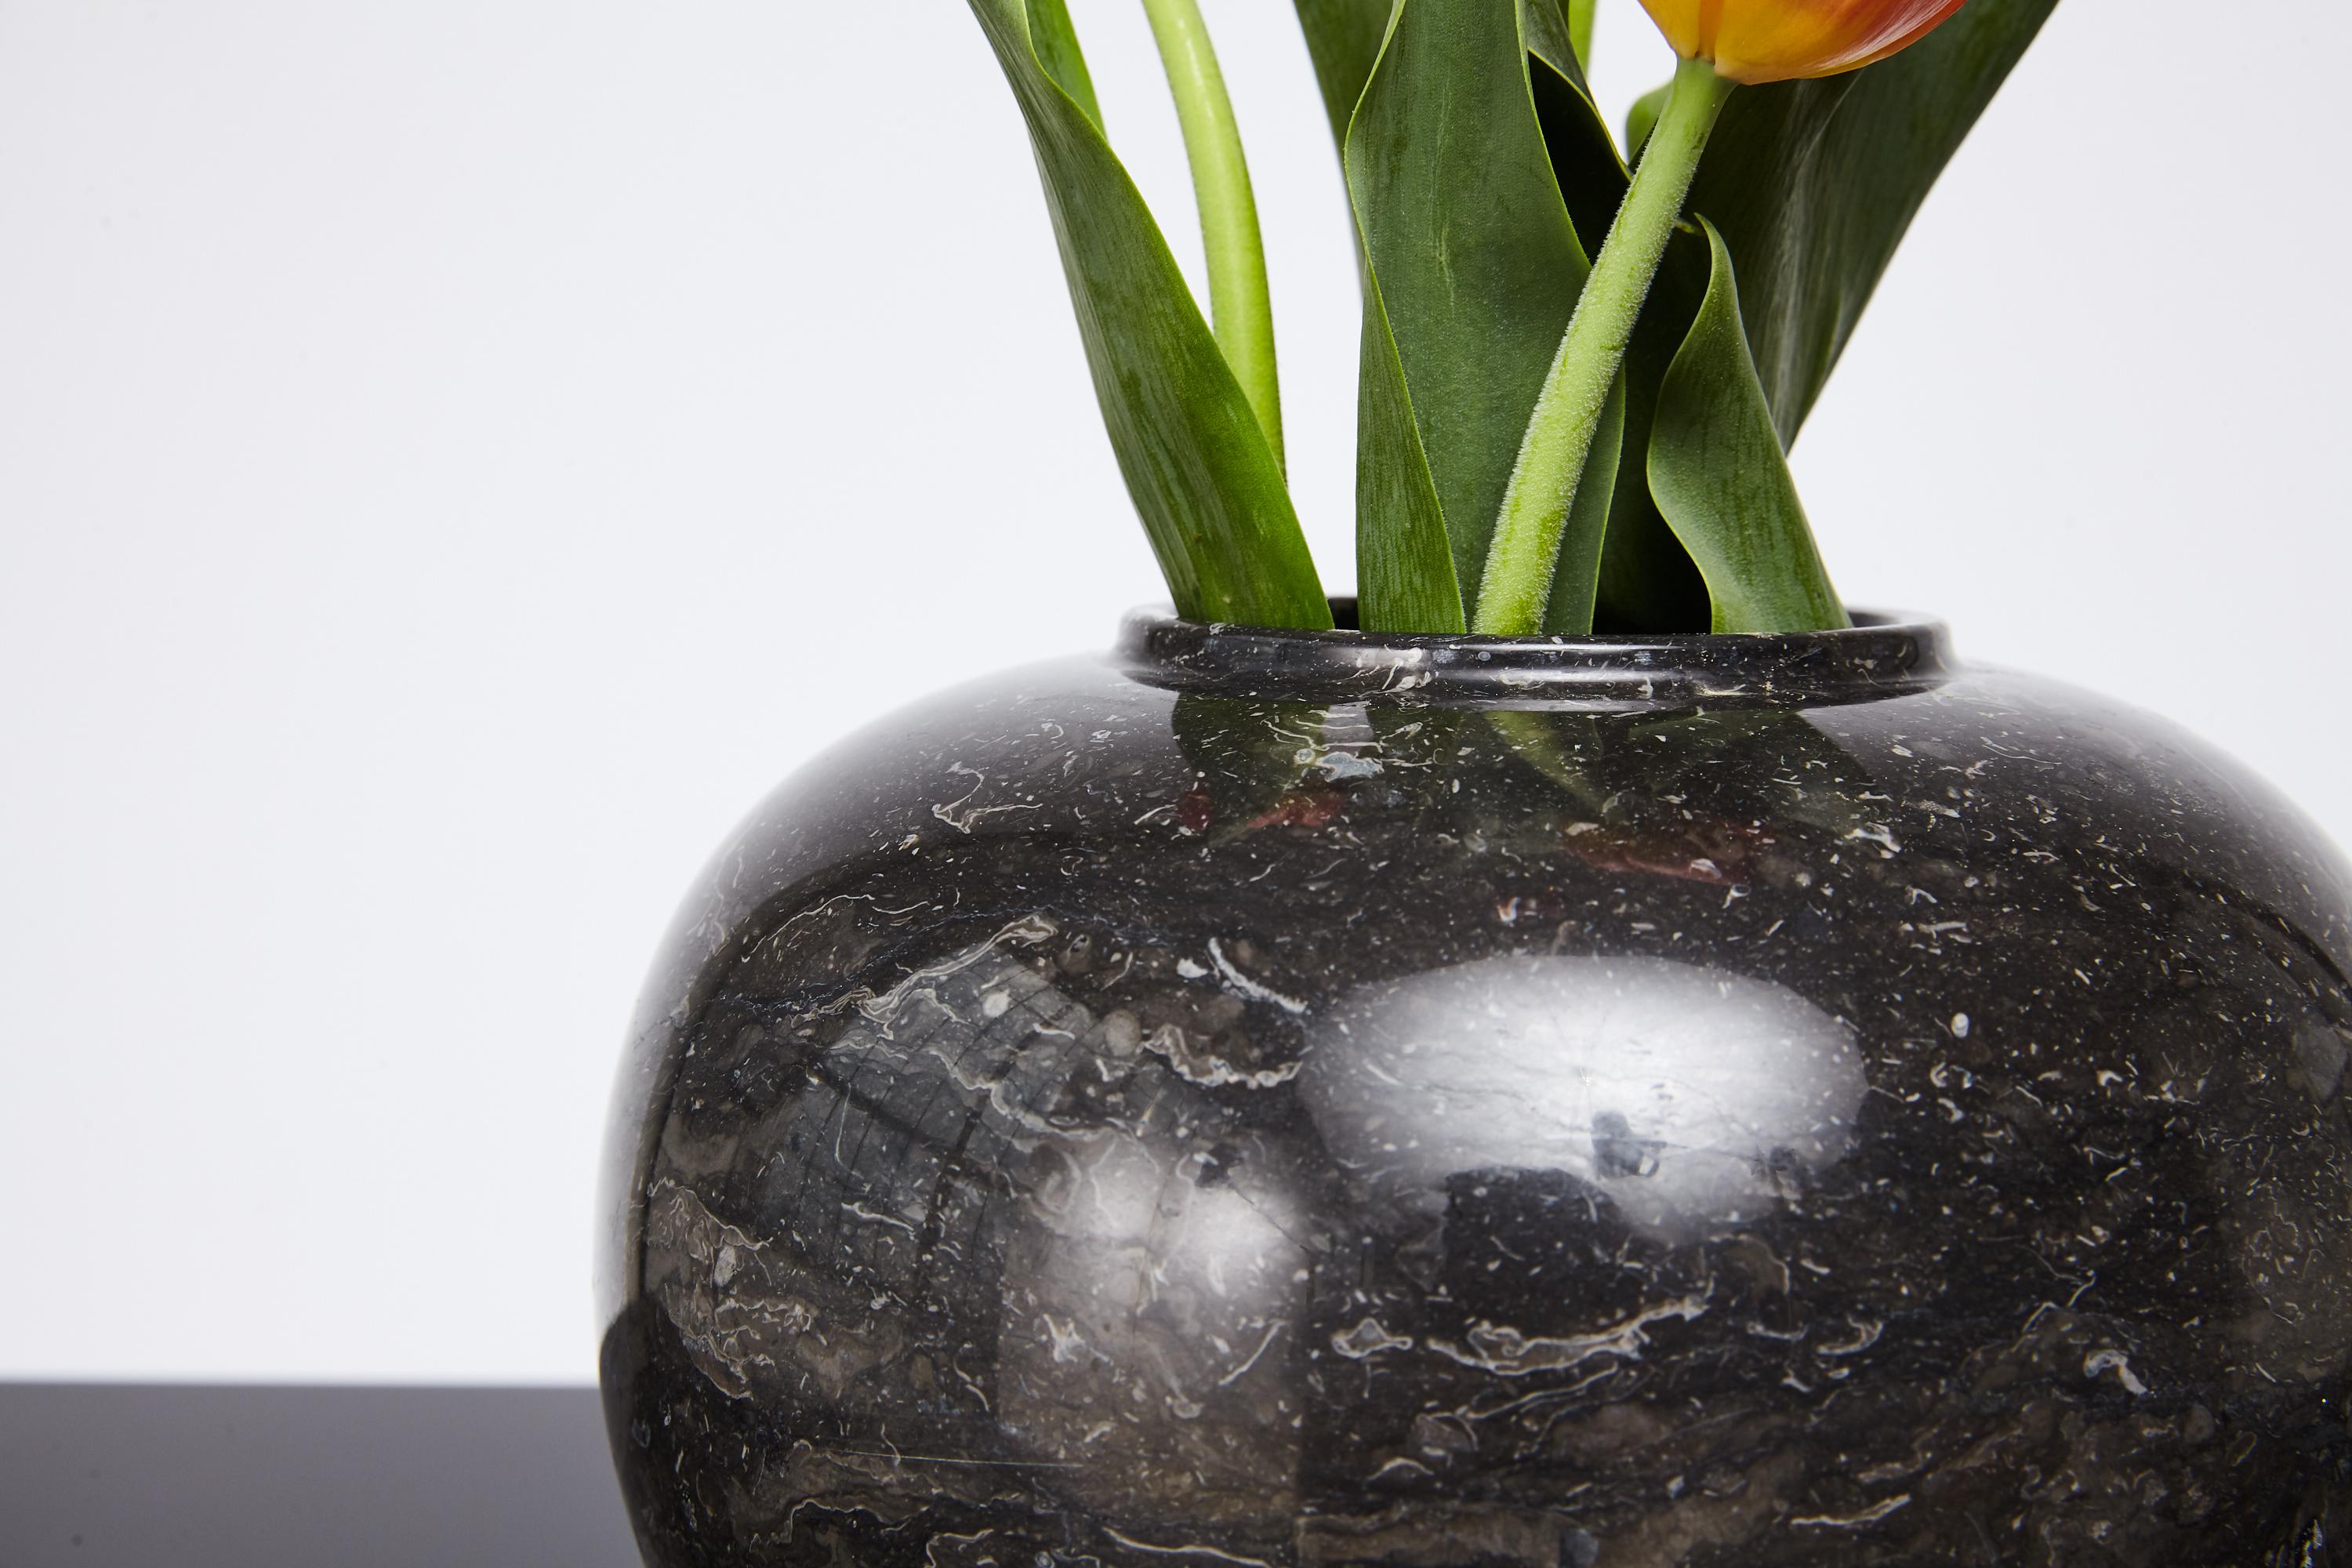 Bulbous marble form vase selected by Interior Designer Kelly Wearstler for her project - The Viceroy Miami. Kelly Wearstler is known to favor interestingly veined marbles and this elegant Zen form vase features gray speckled veins. Part of a